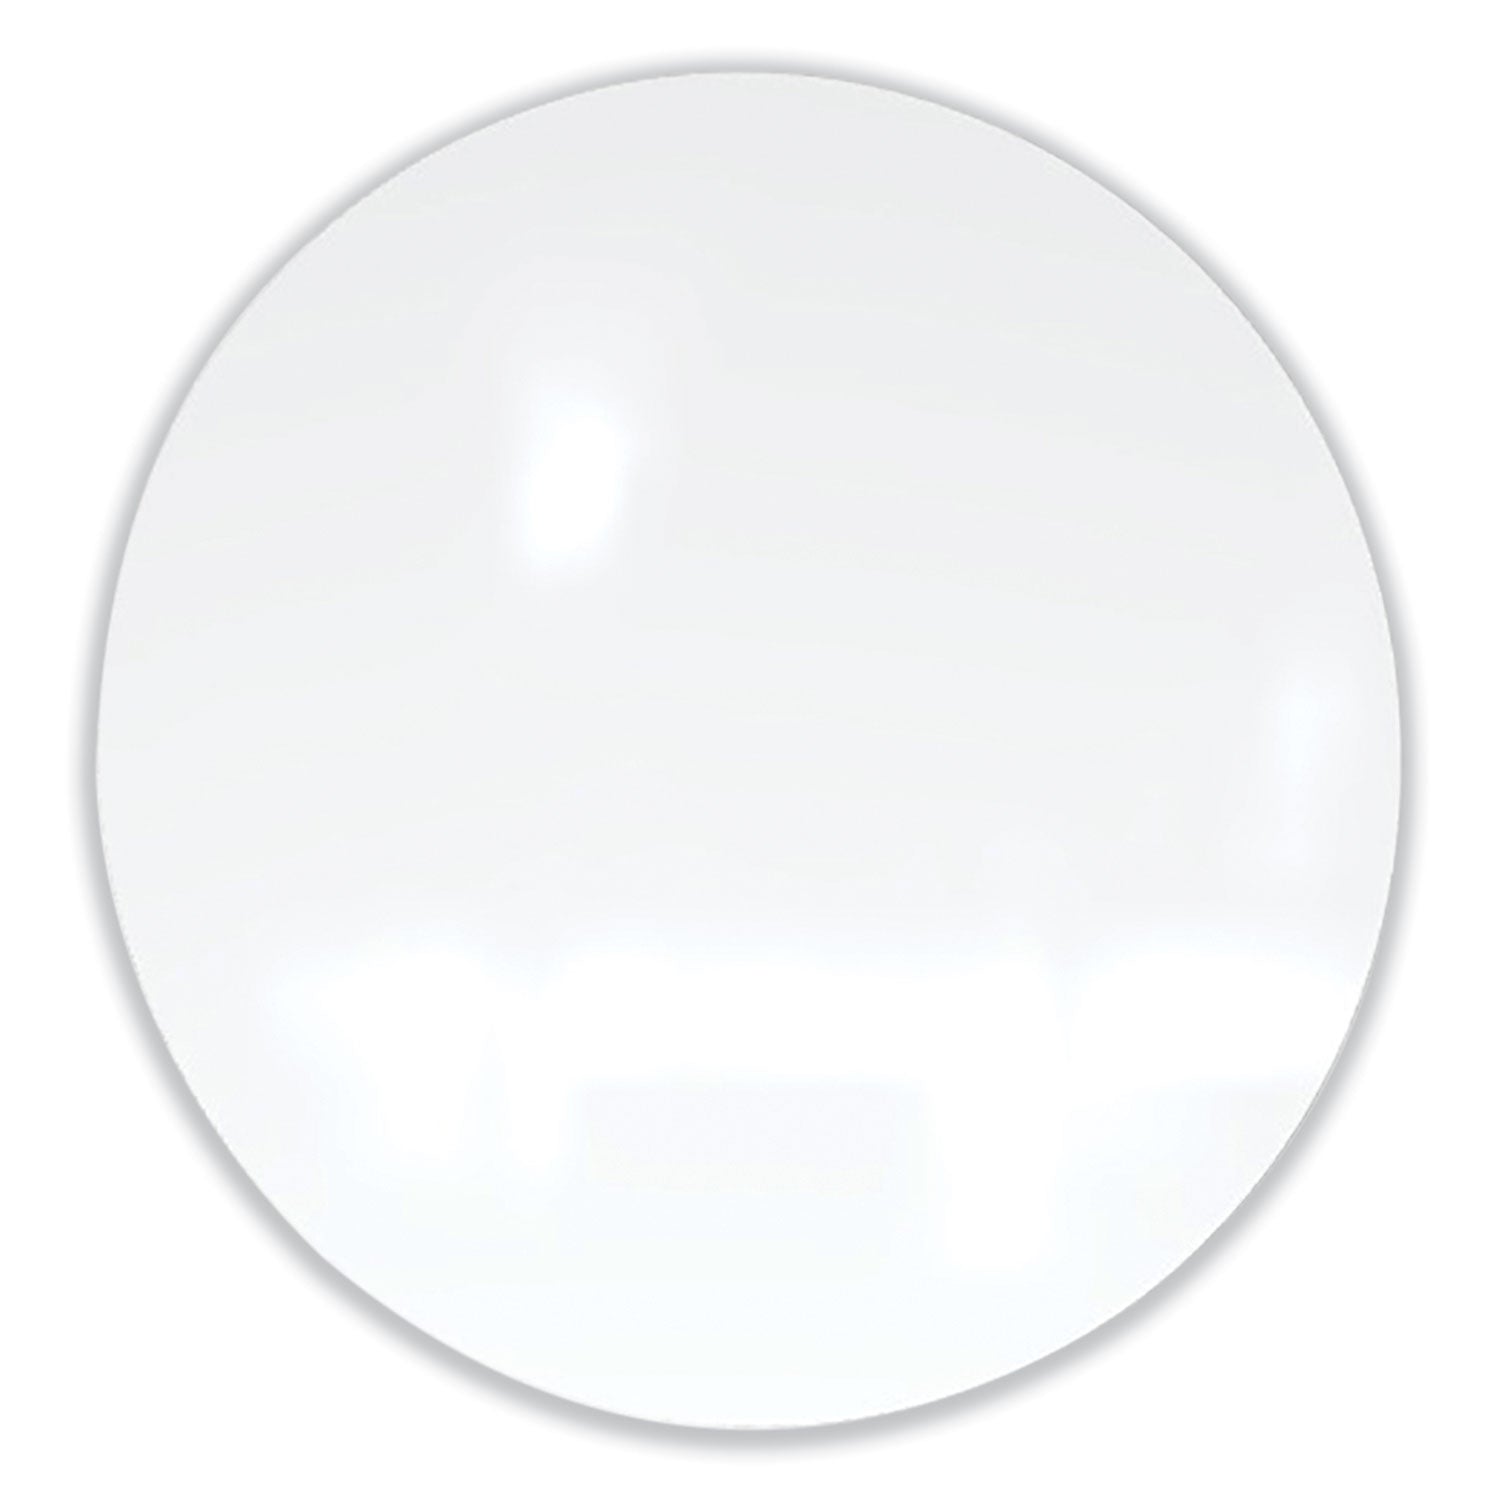 coda-low-profile-circular-non-magnetic-glassboard-36-diameter-white-surface-ships-in-7-10-business-days_ghecdagn36wh - 1